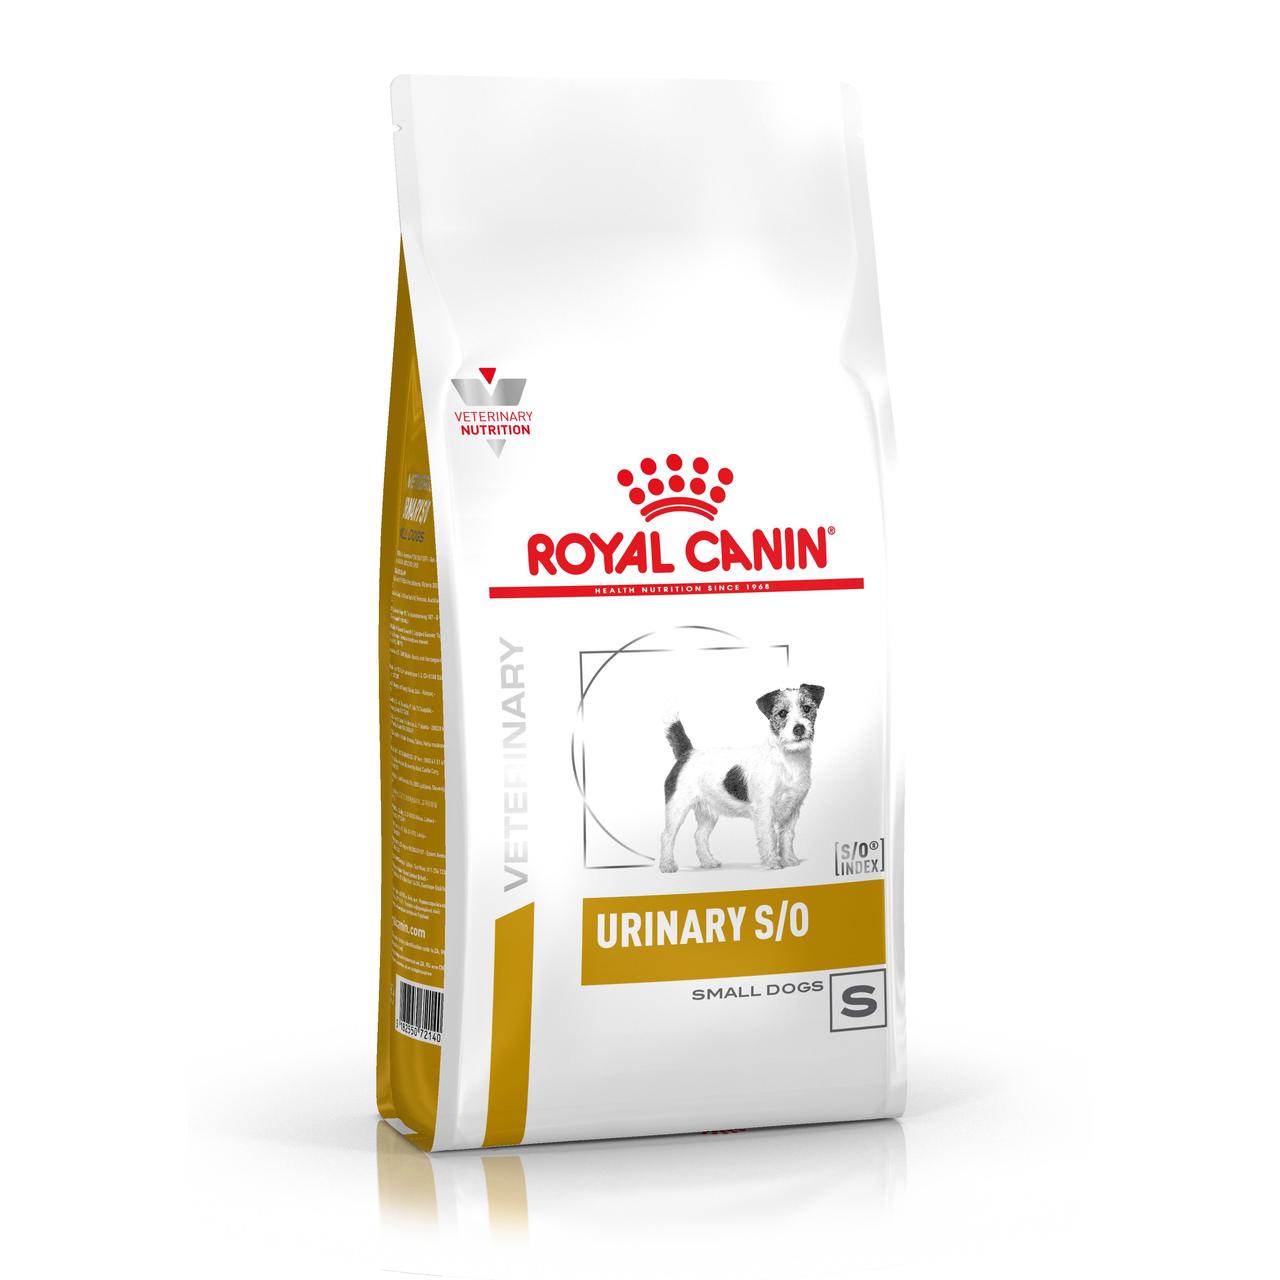 An image of Royal Canin Canine Urinary S/O for Small Dogs